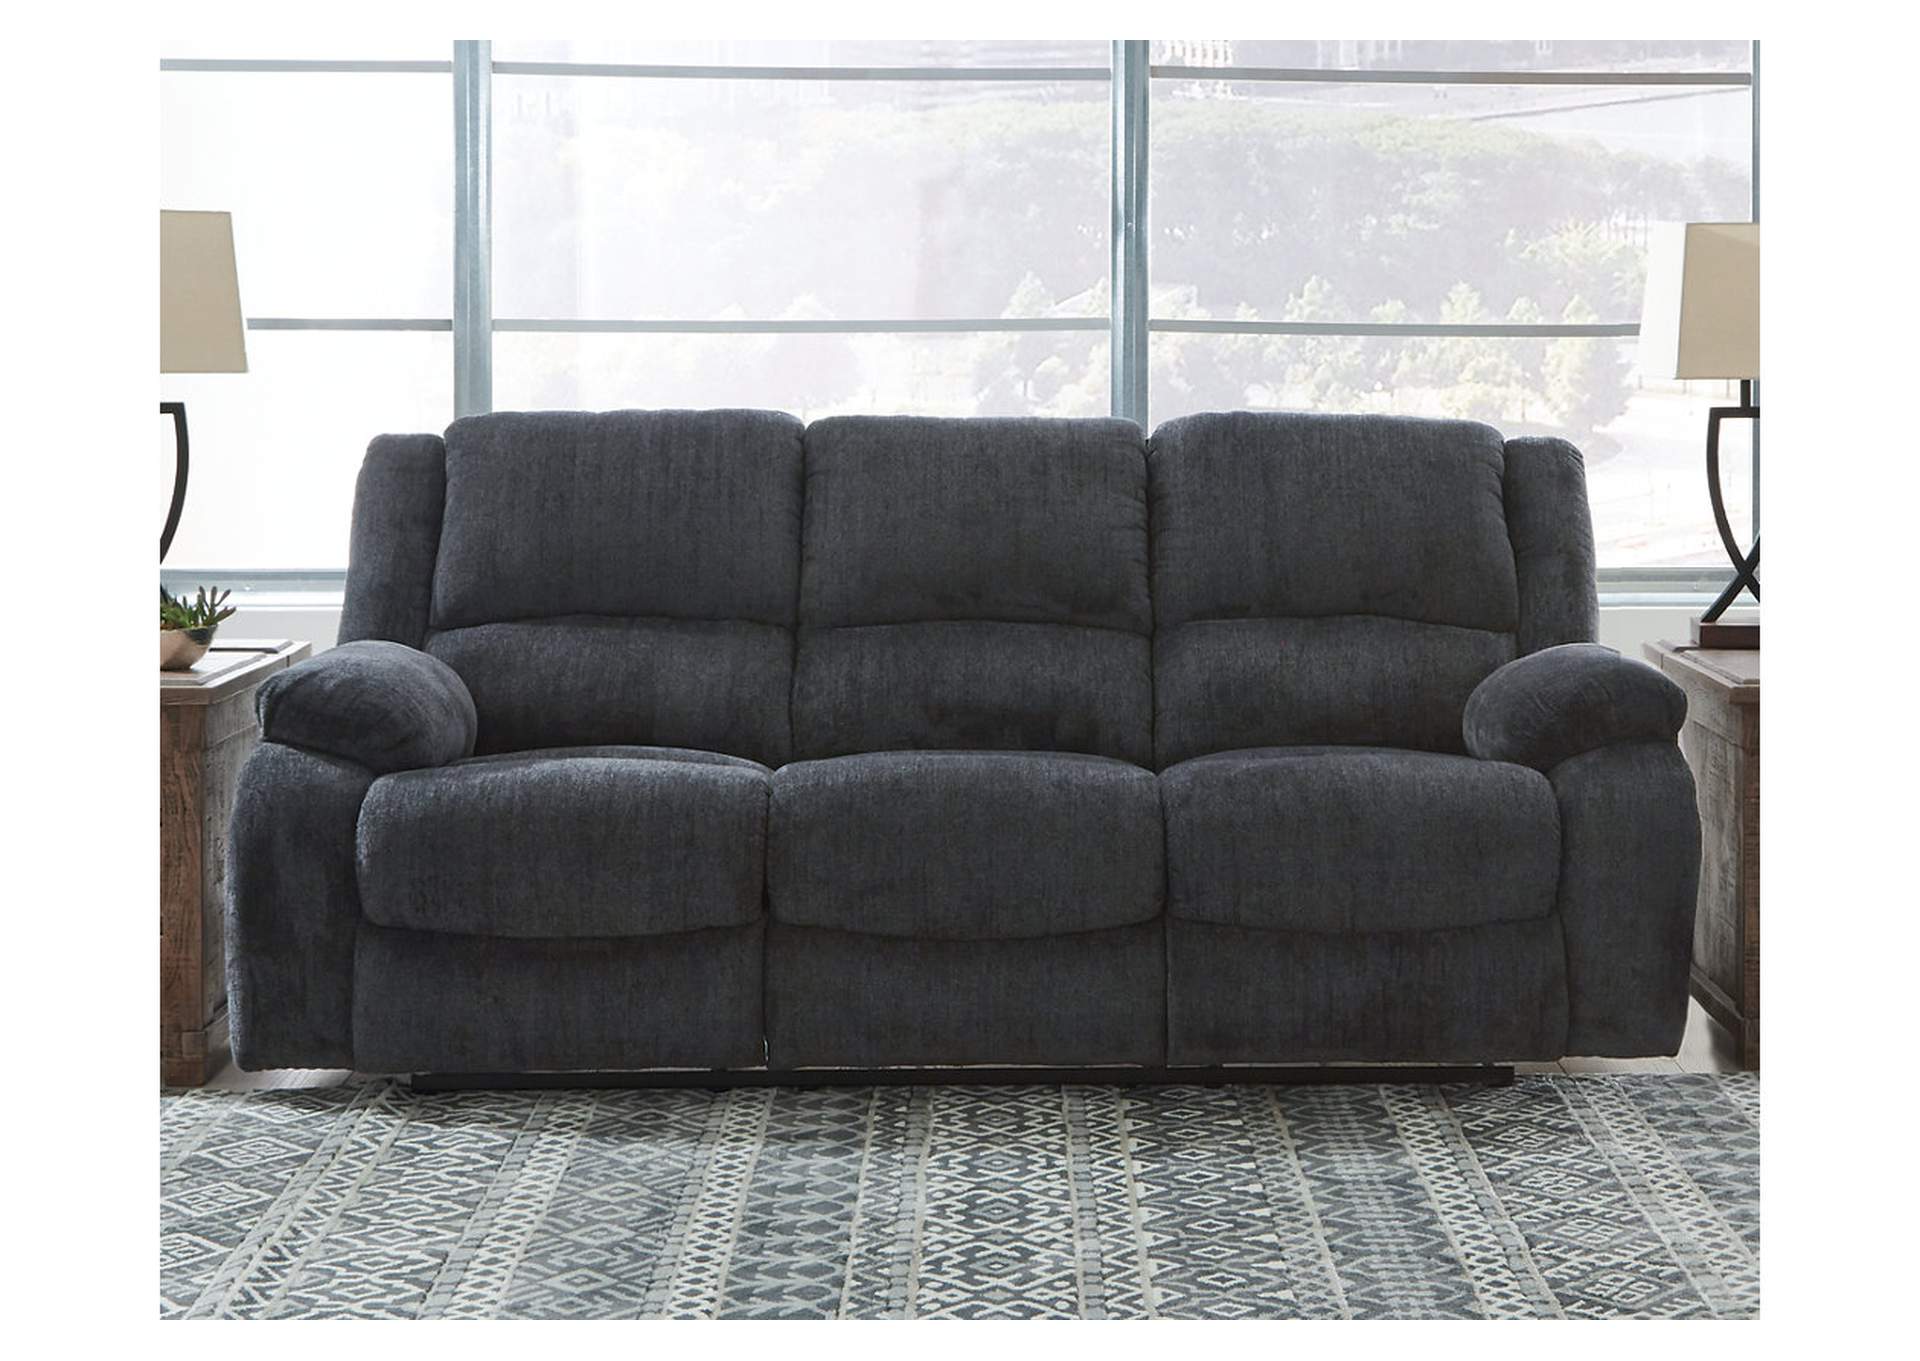 Draycoll Reclining Sofa and Recliner,Signature Design By Ashley